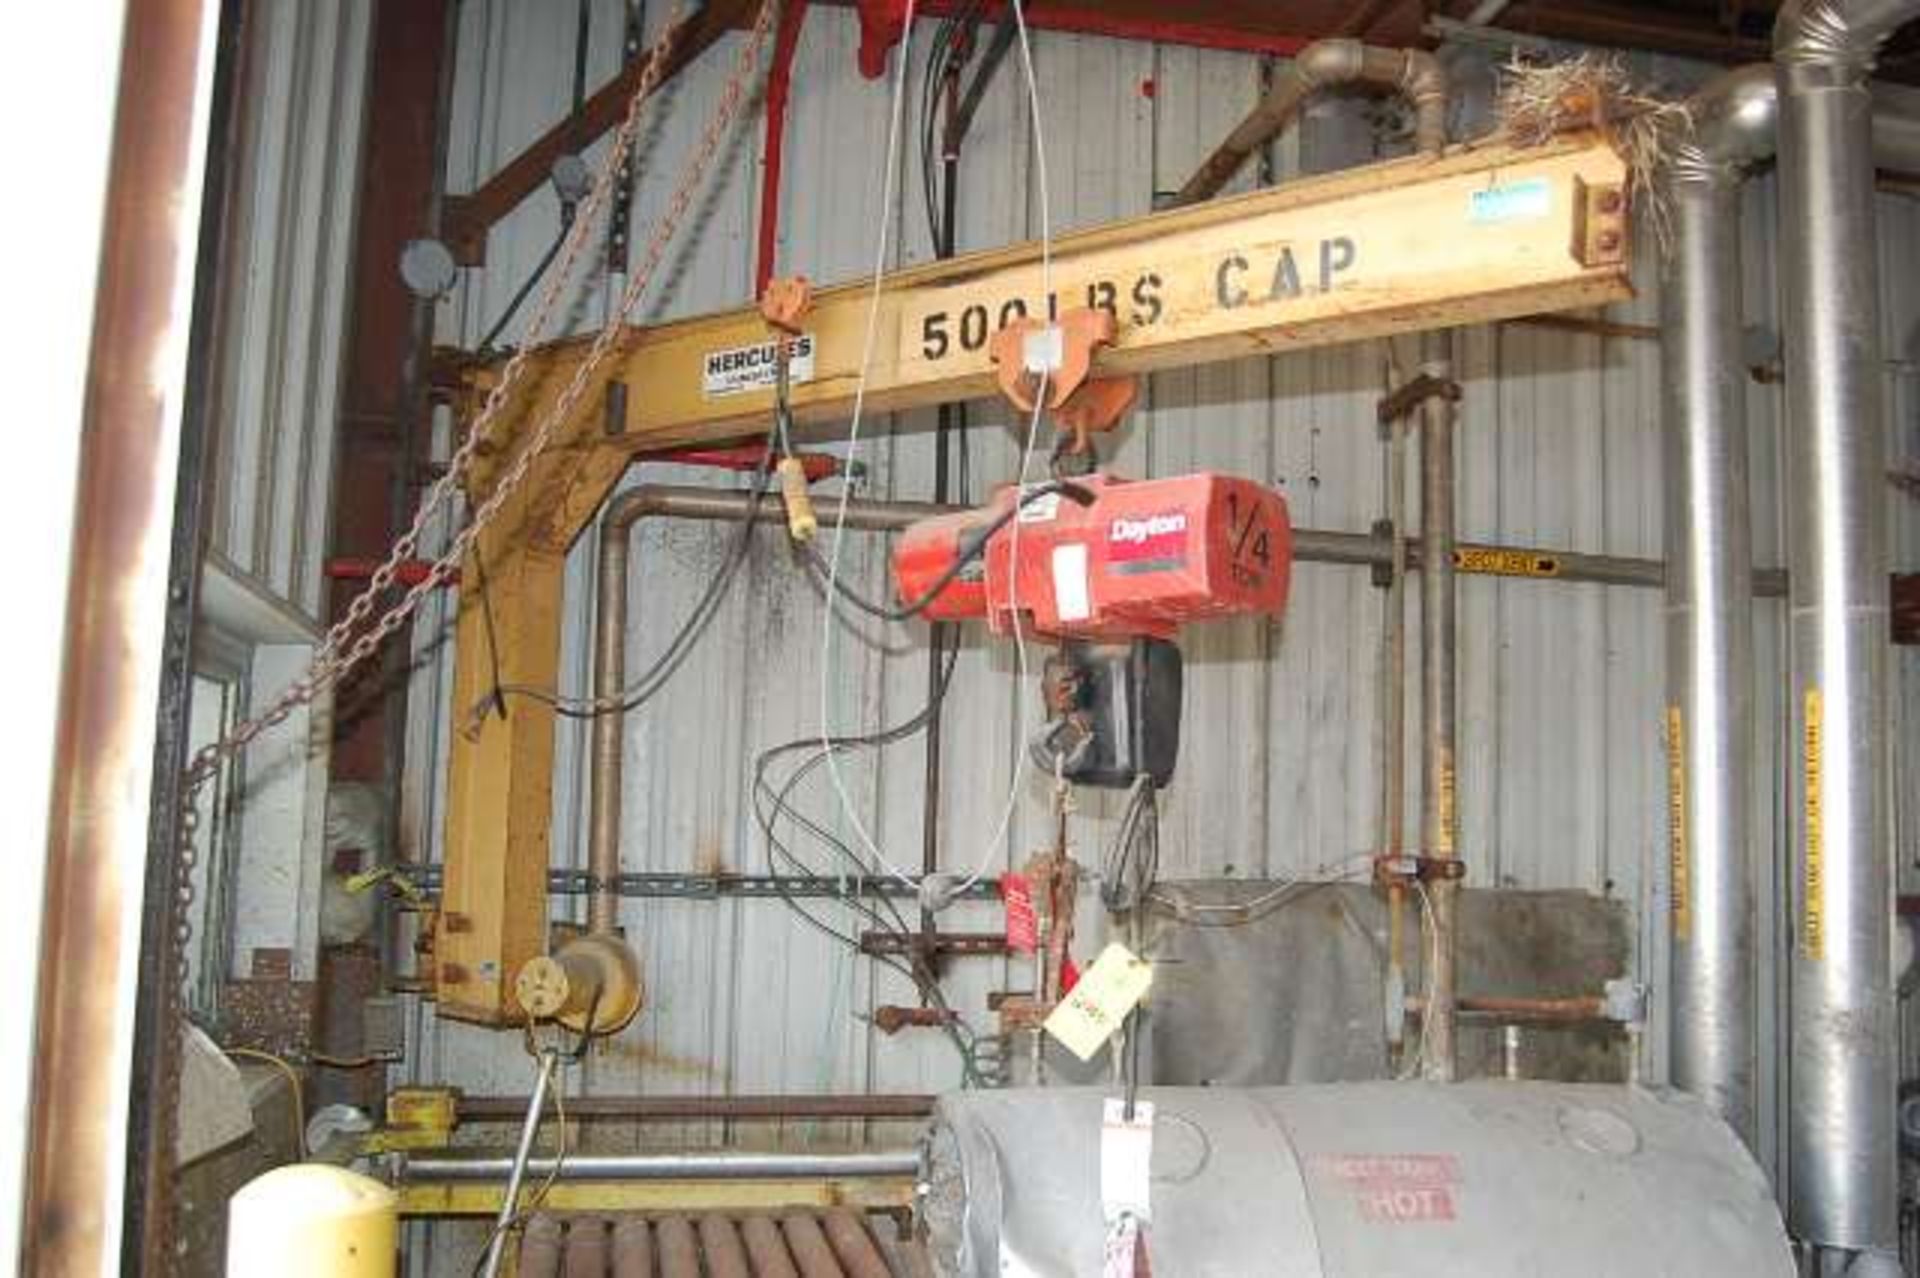 Hercules Jib Crane, Rated 500 lbs. Capacity, Wall Mount, Includes Dayton 1/4 on Electric Chain